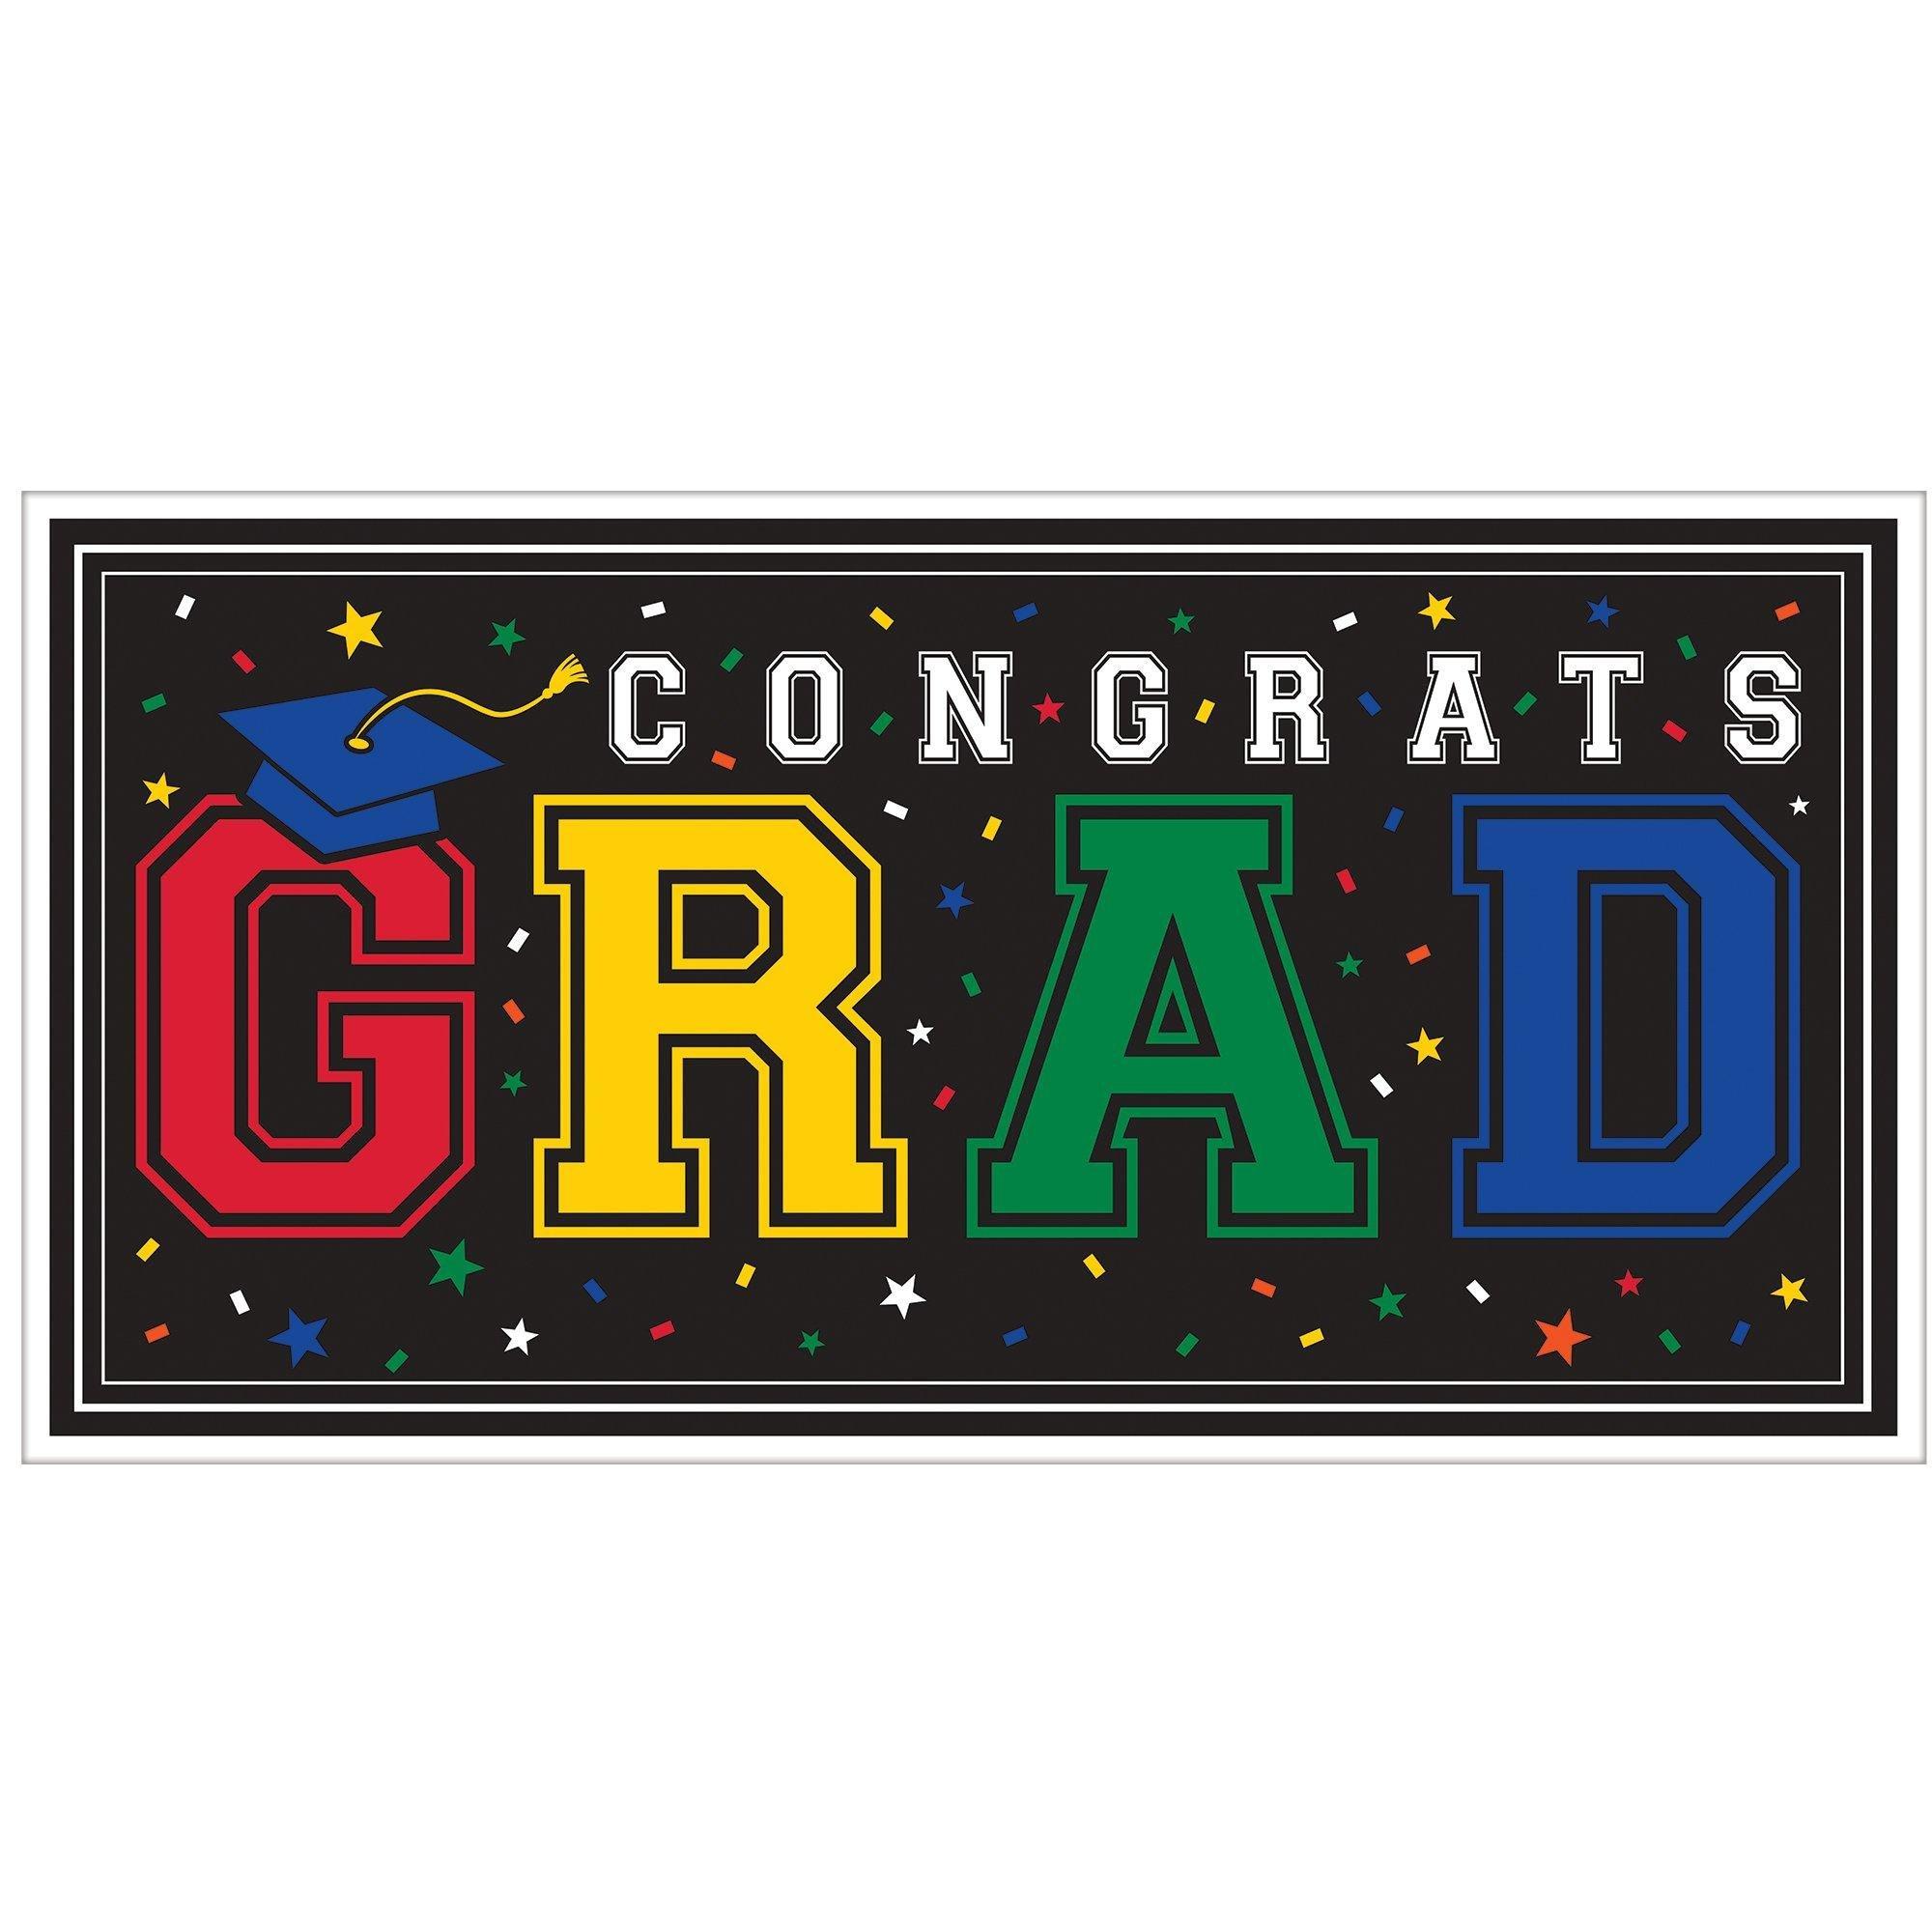 Graduation Party Supplies Kit for 40 with Decorations, Banners, Balloons, Plates, Napkins - White Congrats